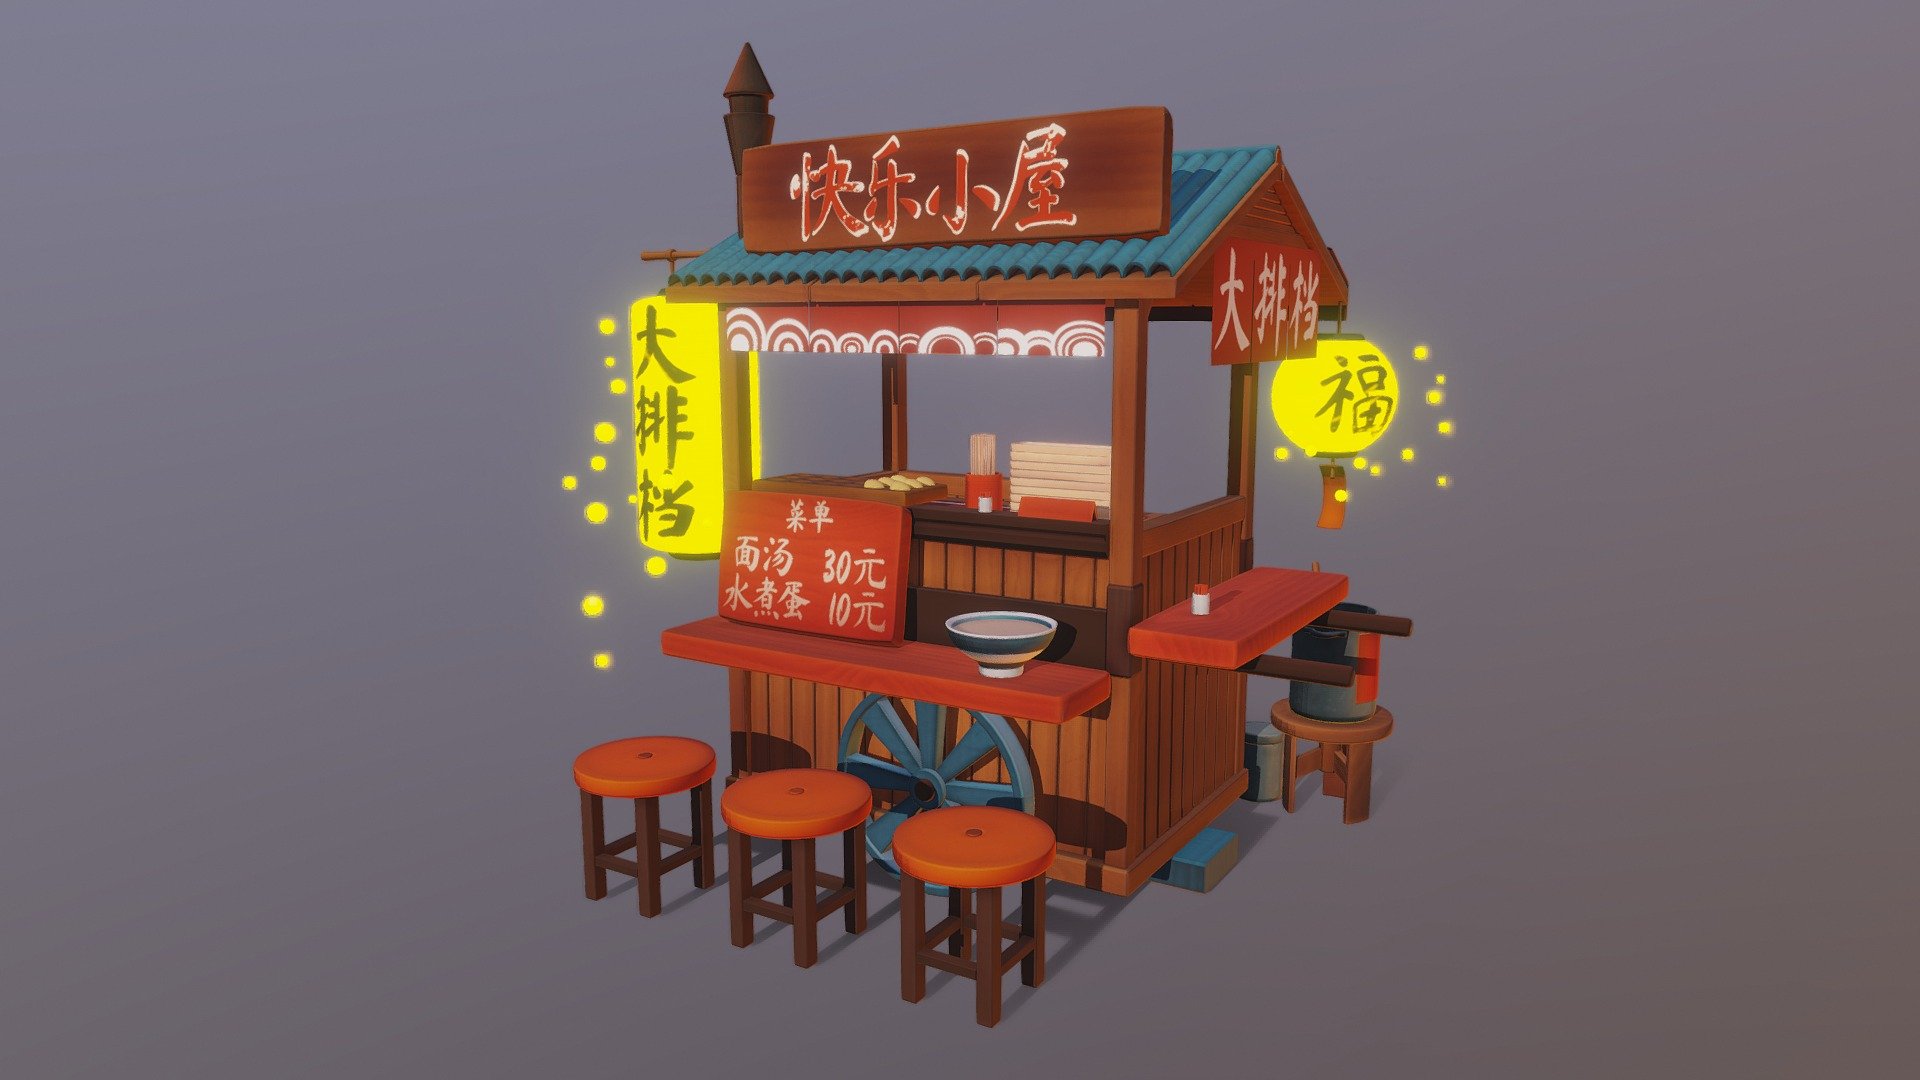 Noodle bar diorama addition for my portfolio. 

Inspired by 2D concept I found on Pinterest, haven't been able to find the name of the artist 3d model